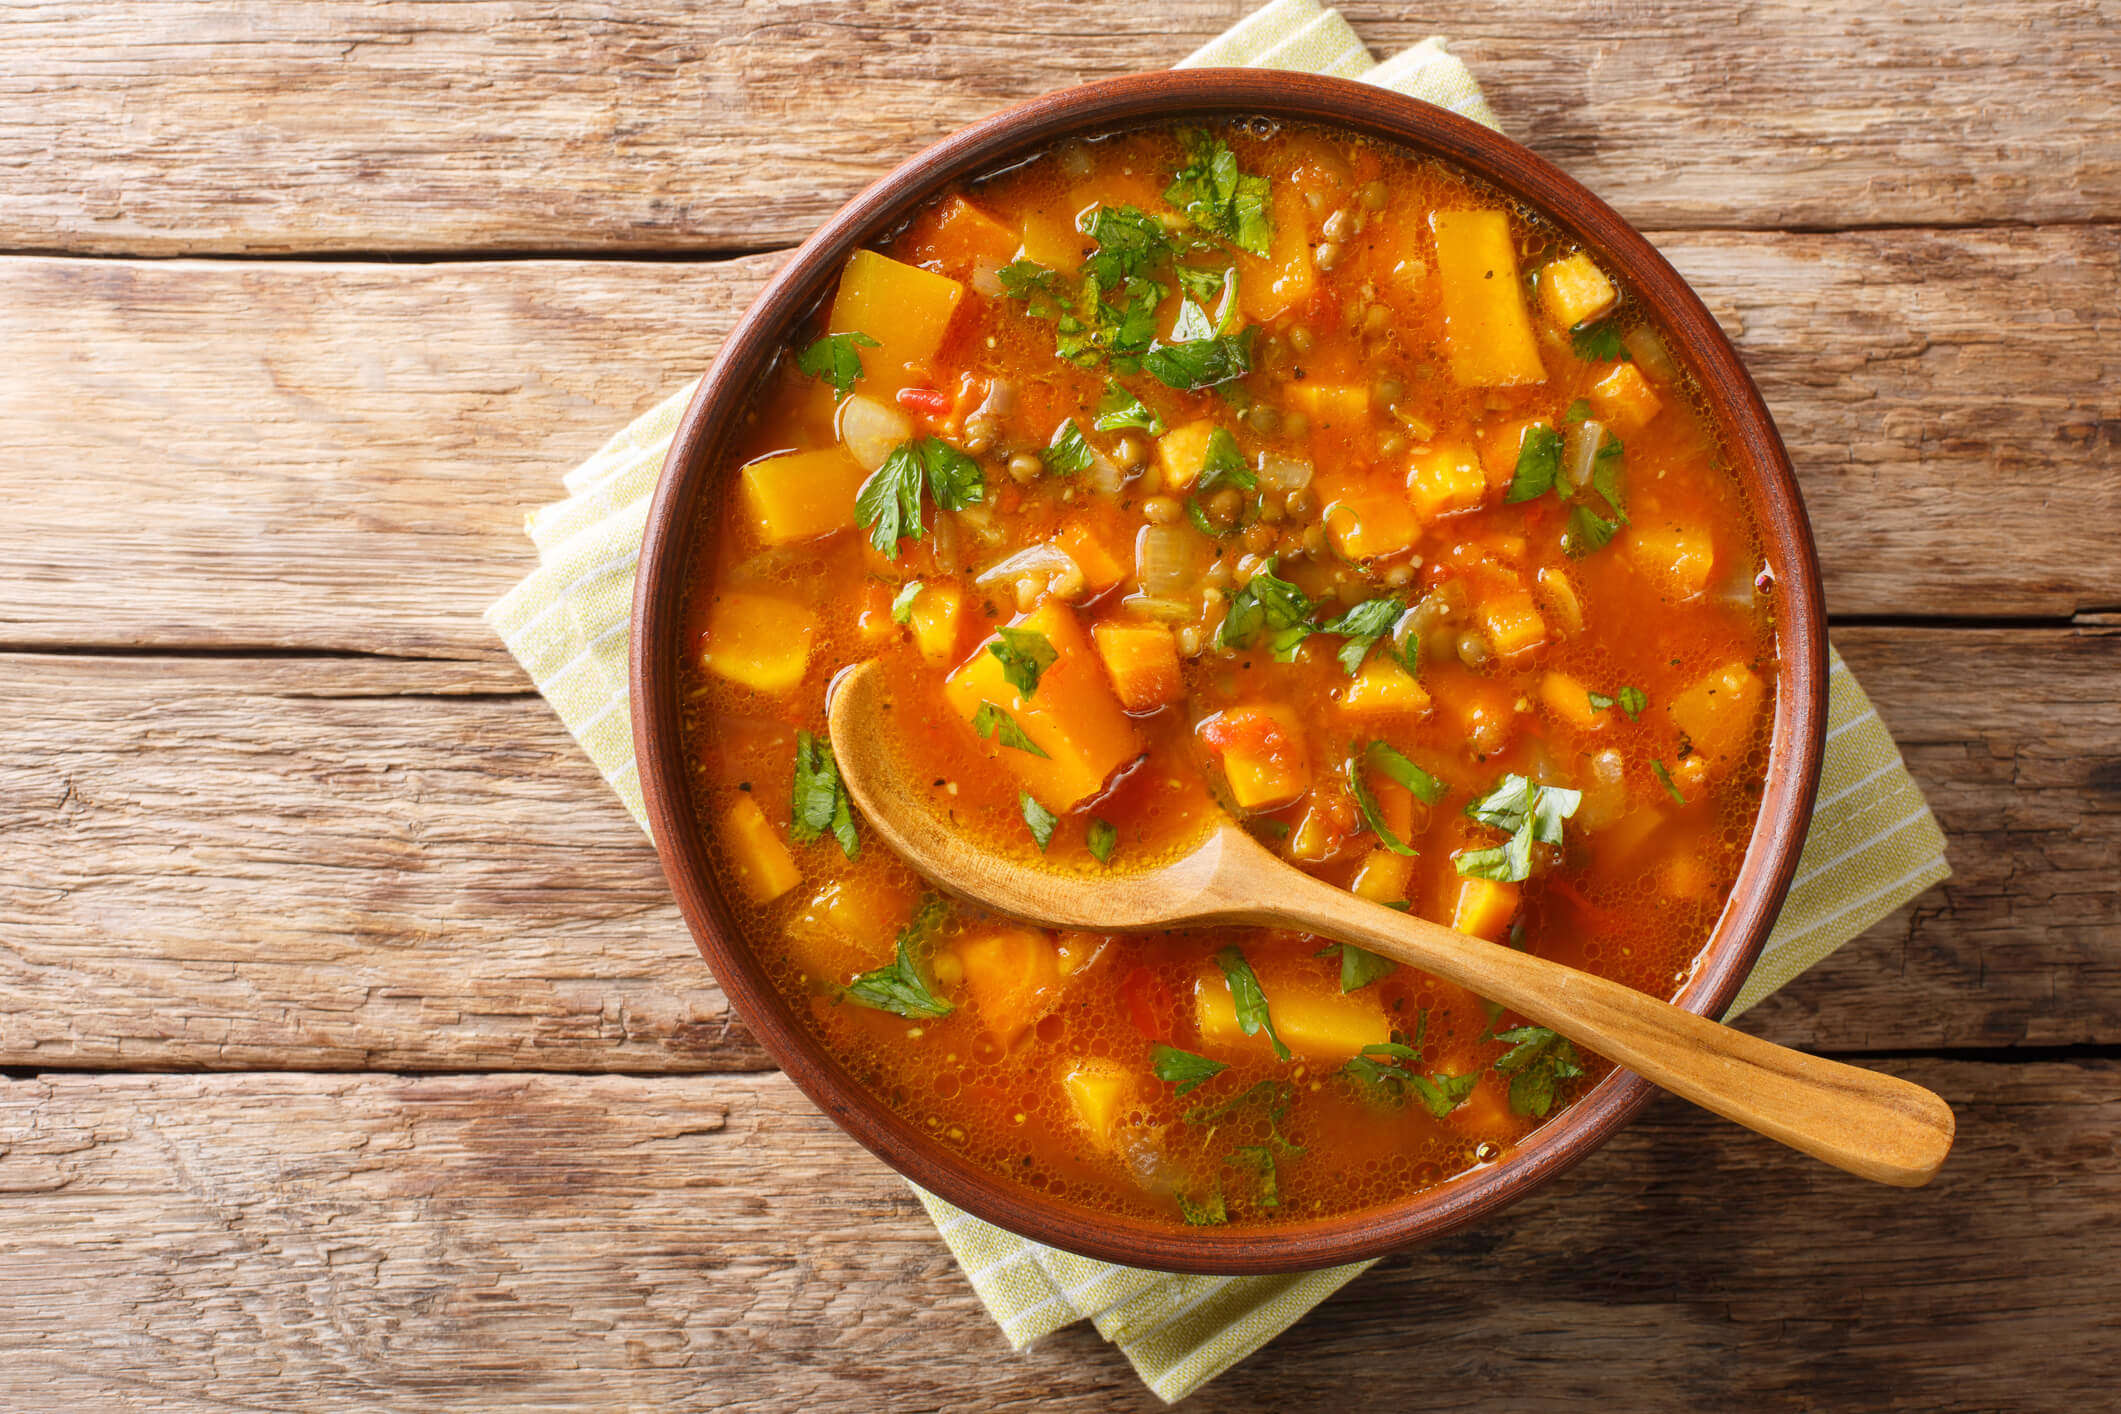 a bowl of homemade vegetable stew on a wooden background